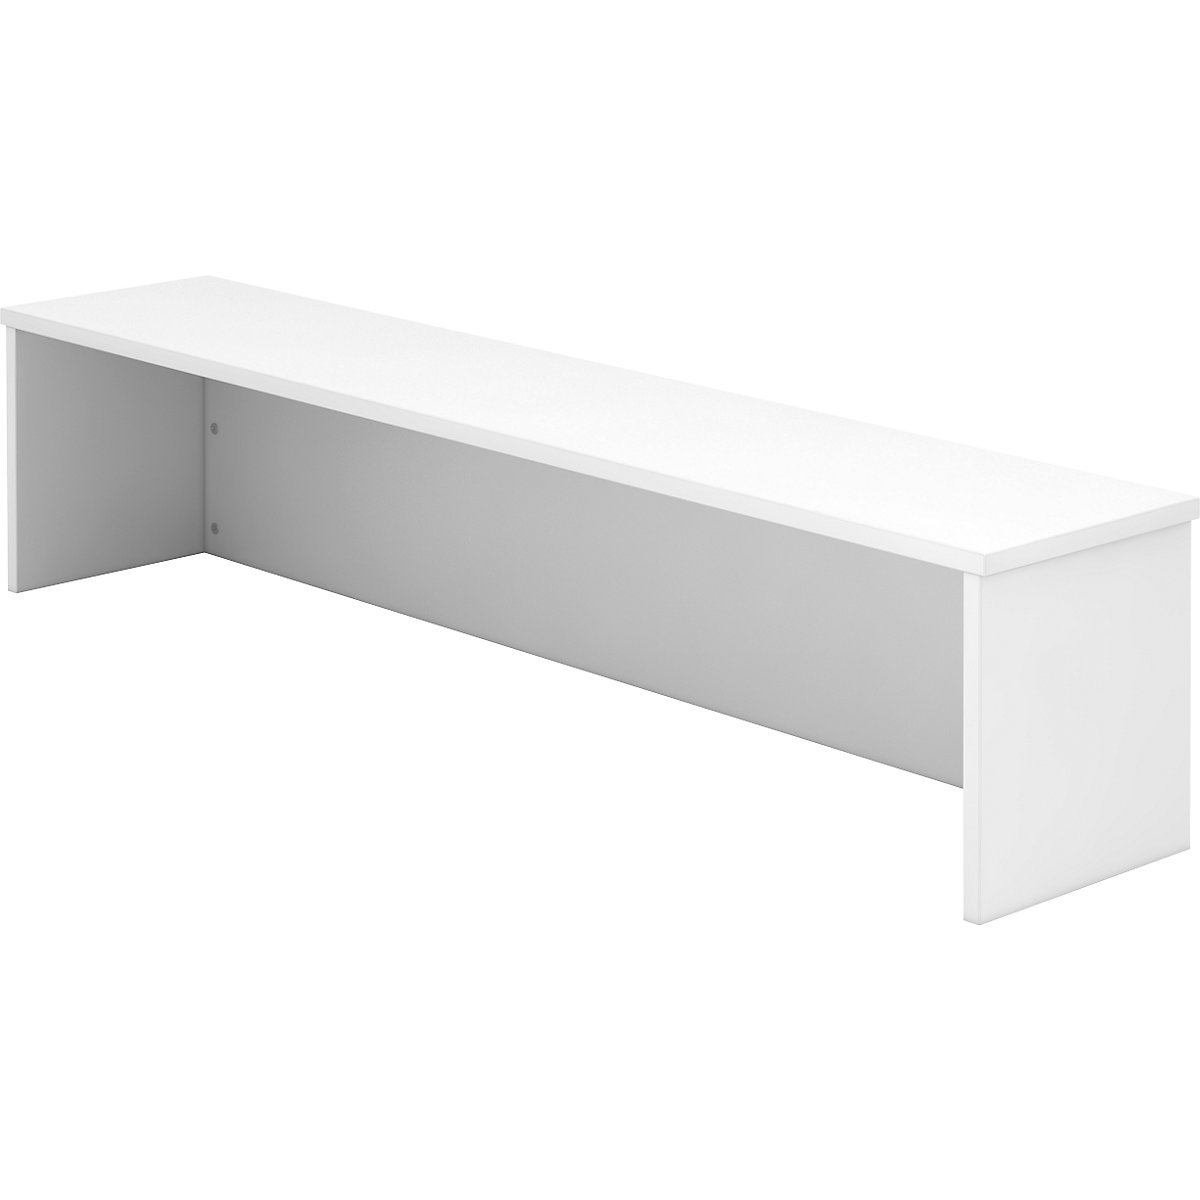 Counter extension VIOLA, for desk, 1600 mm wide, white